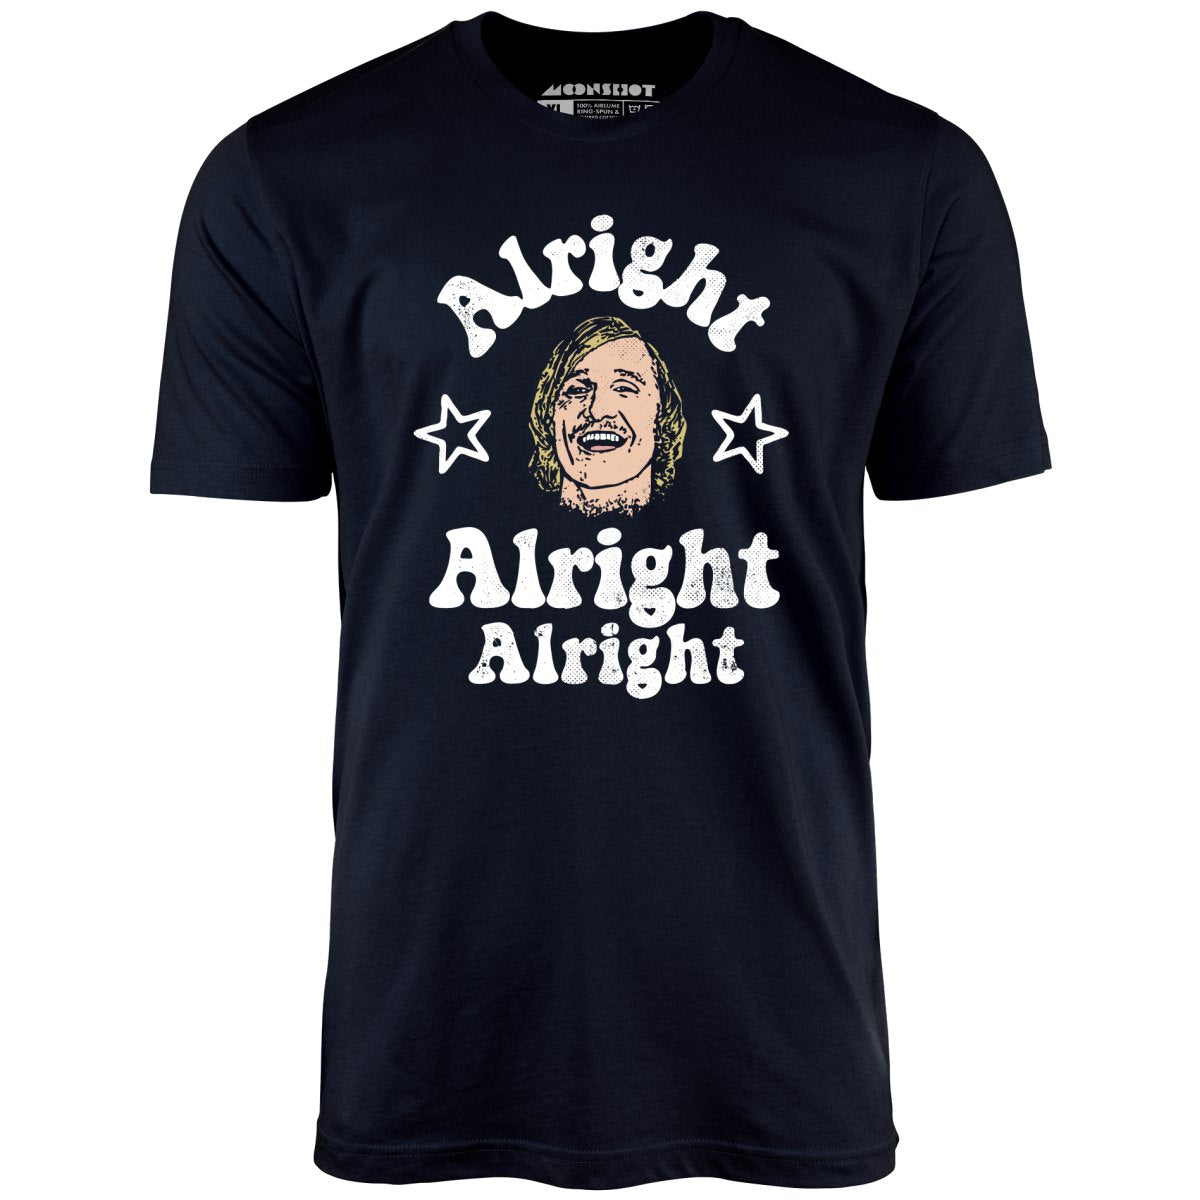 Alright Alright Alright Wooderson - Unisex T-Shirt